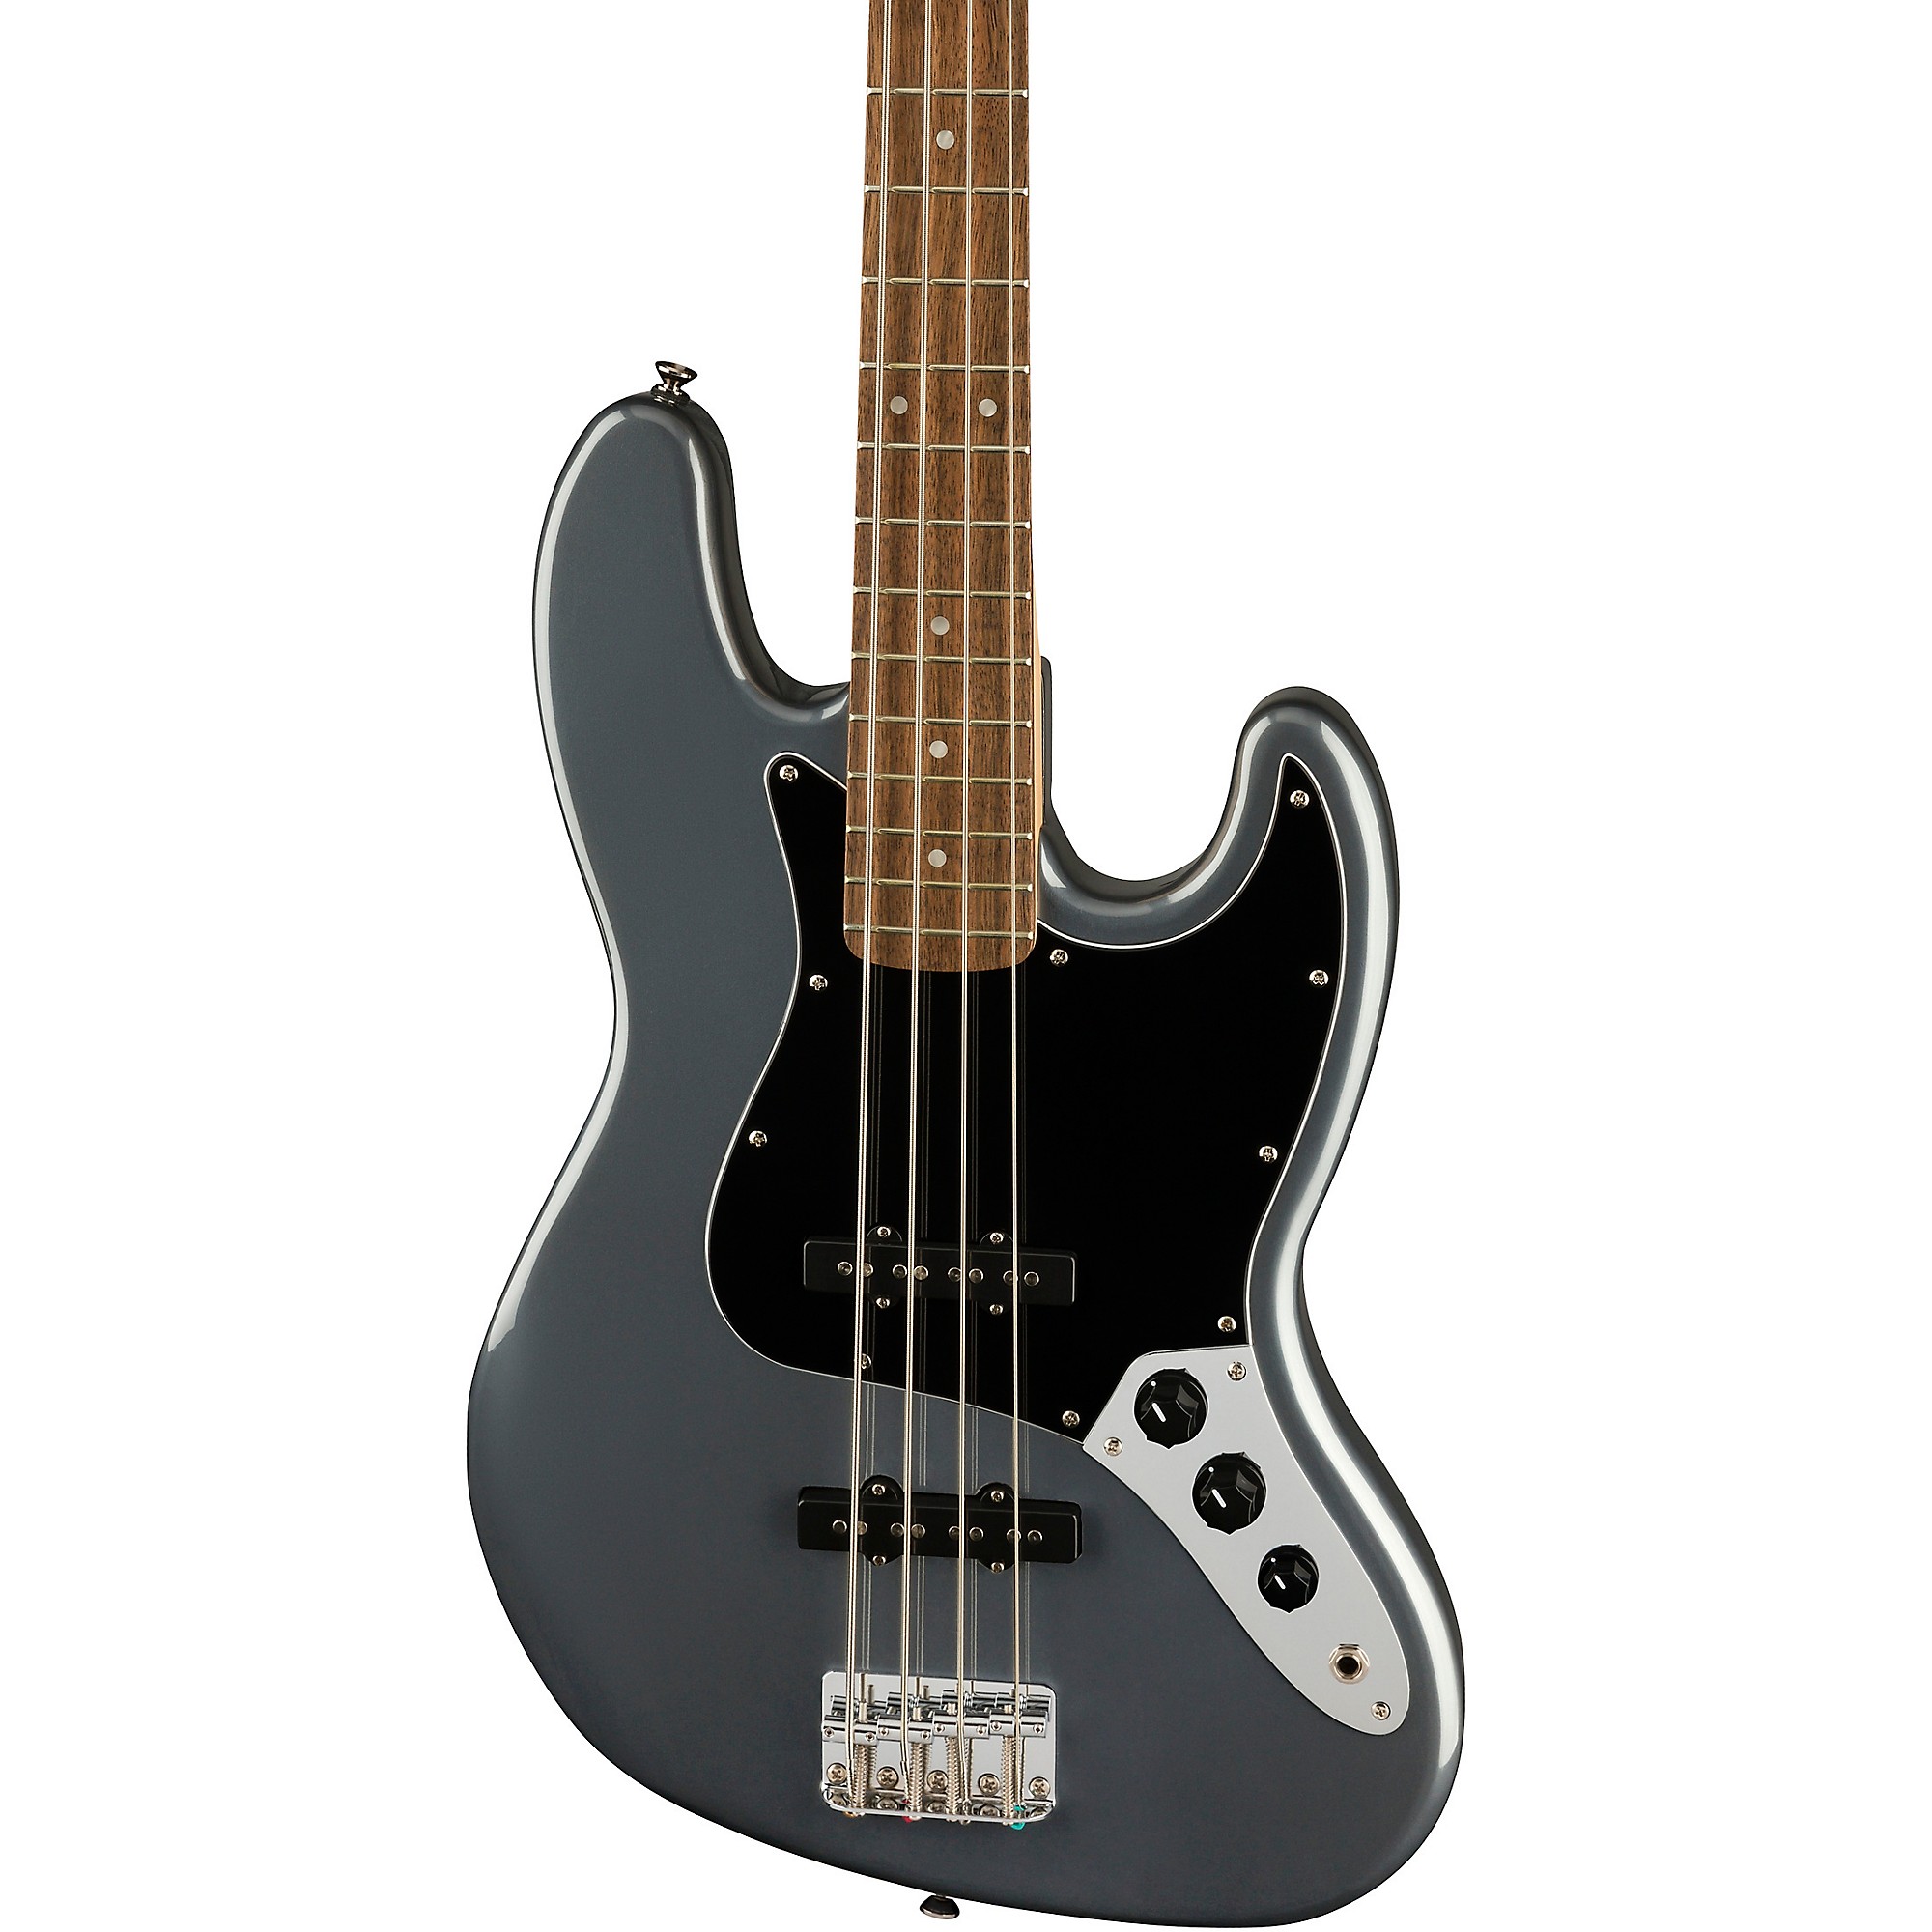 Squier Affinity Series Jazz Bass Charcoal Frost Metallic | Guitar Center